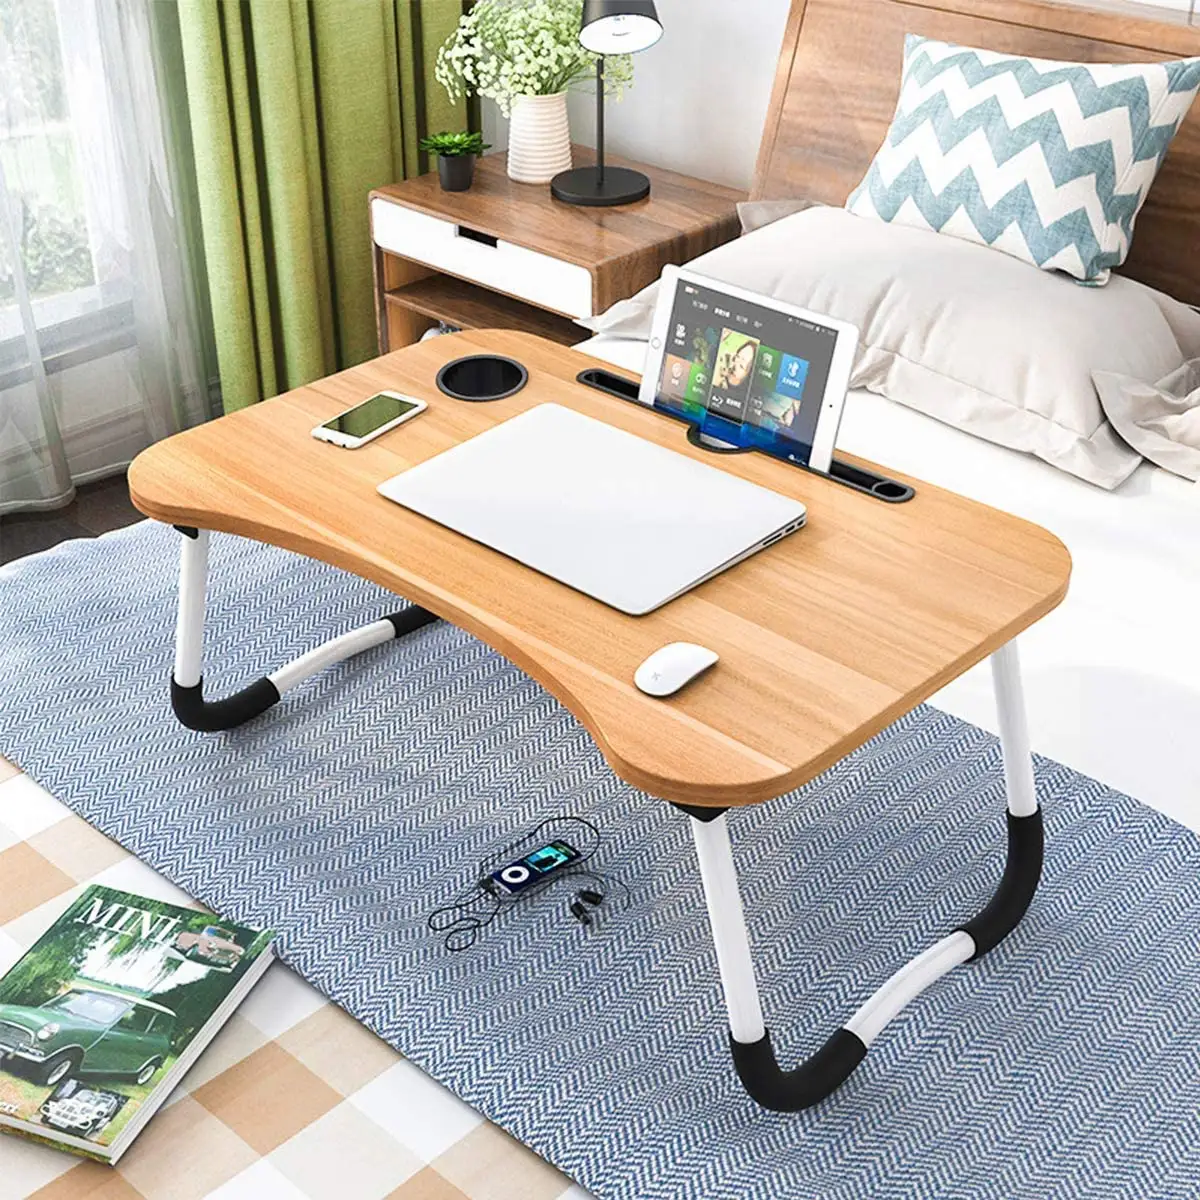 Laptop Table for Bed, Folding Breakfast Tray Portable Mini Picnic Desk Storage Space Laptop Table